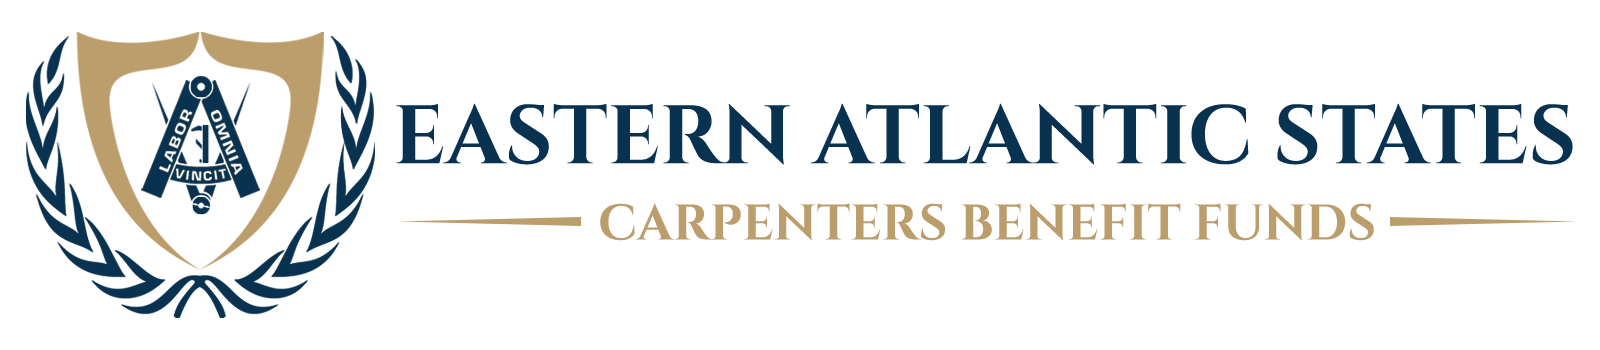 Eastern Atlantic States Carpenters Benefit Funds